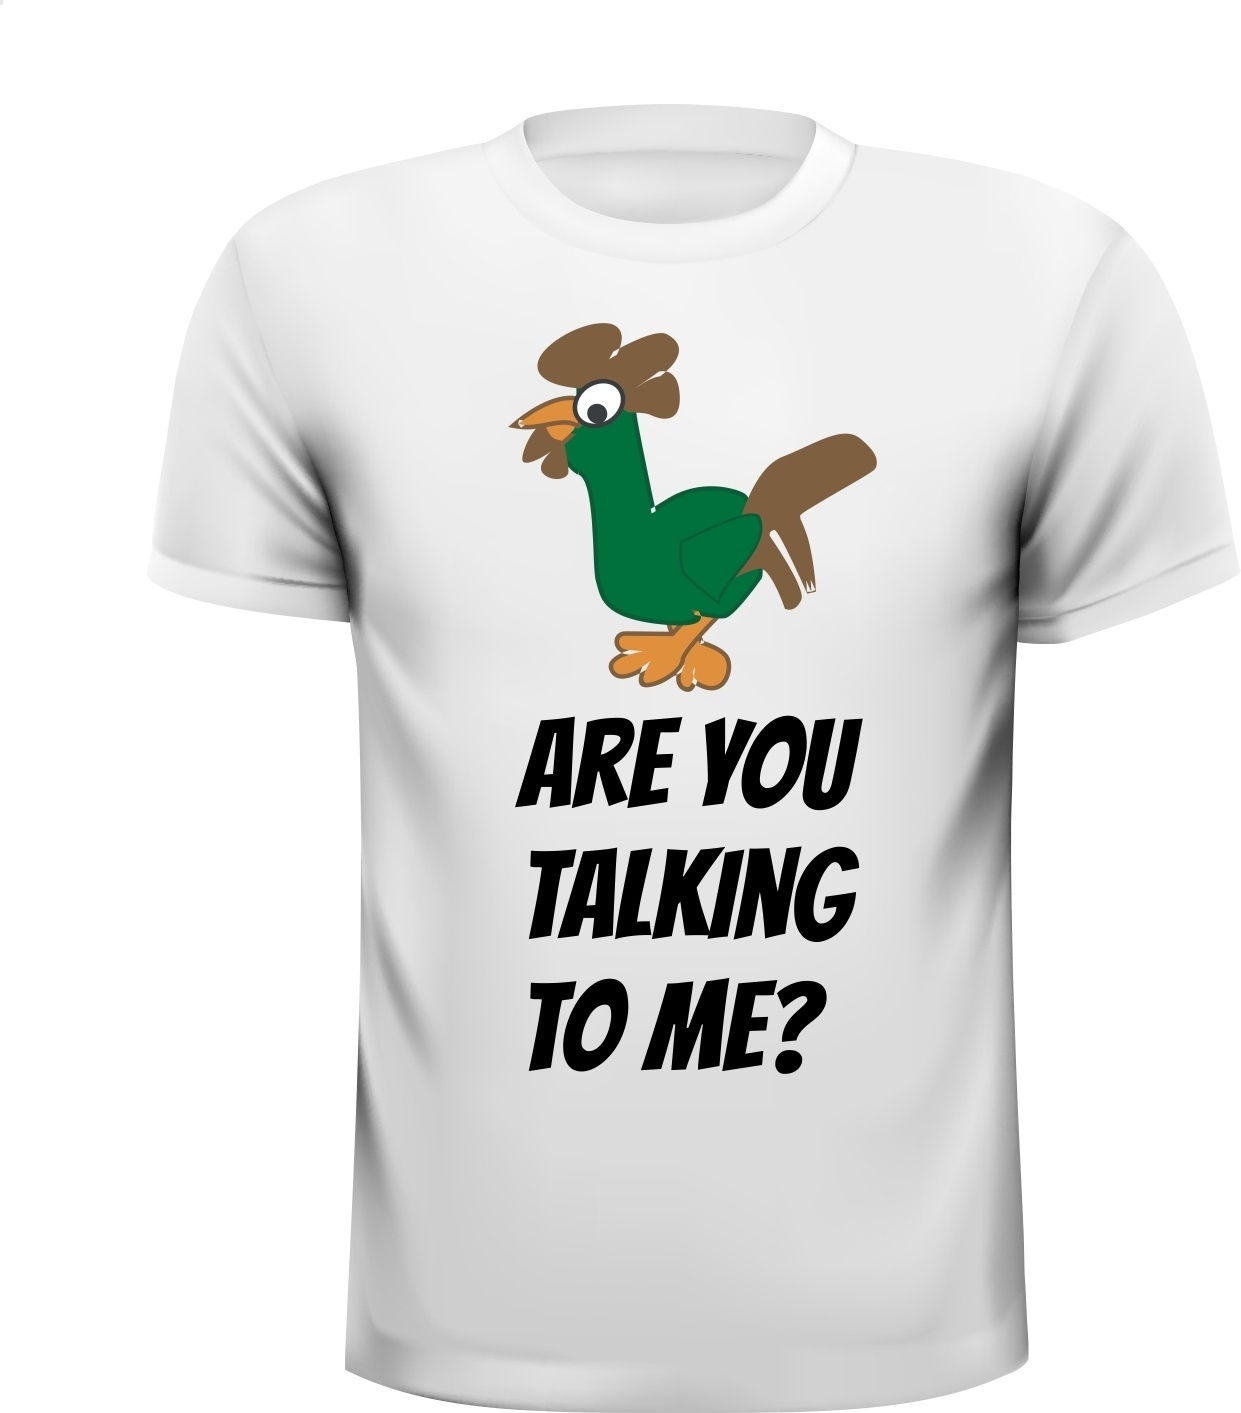 Are you talking to me? T-shirt